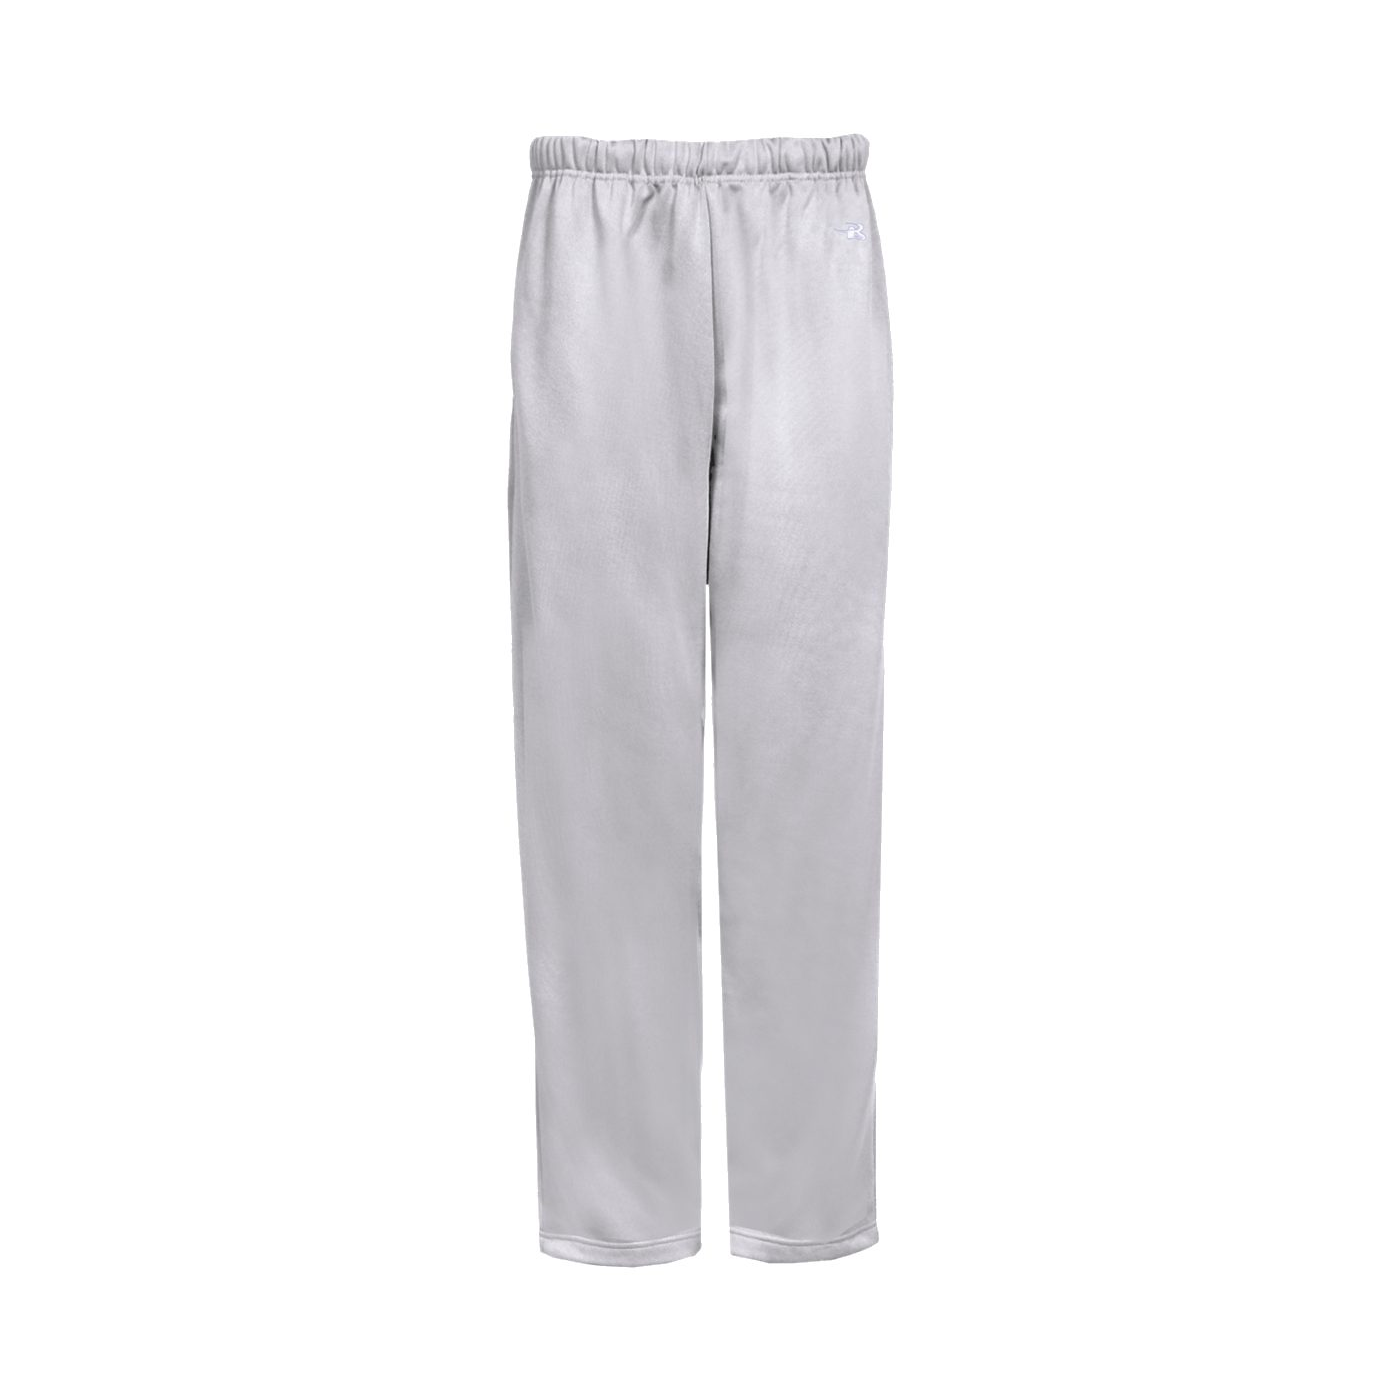 Perf. Fleece Open Bottom Youth Pant | Badger Sport - Athletic Apparel